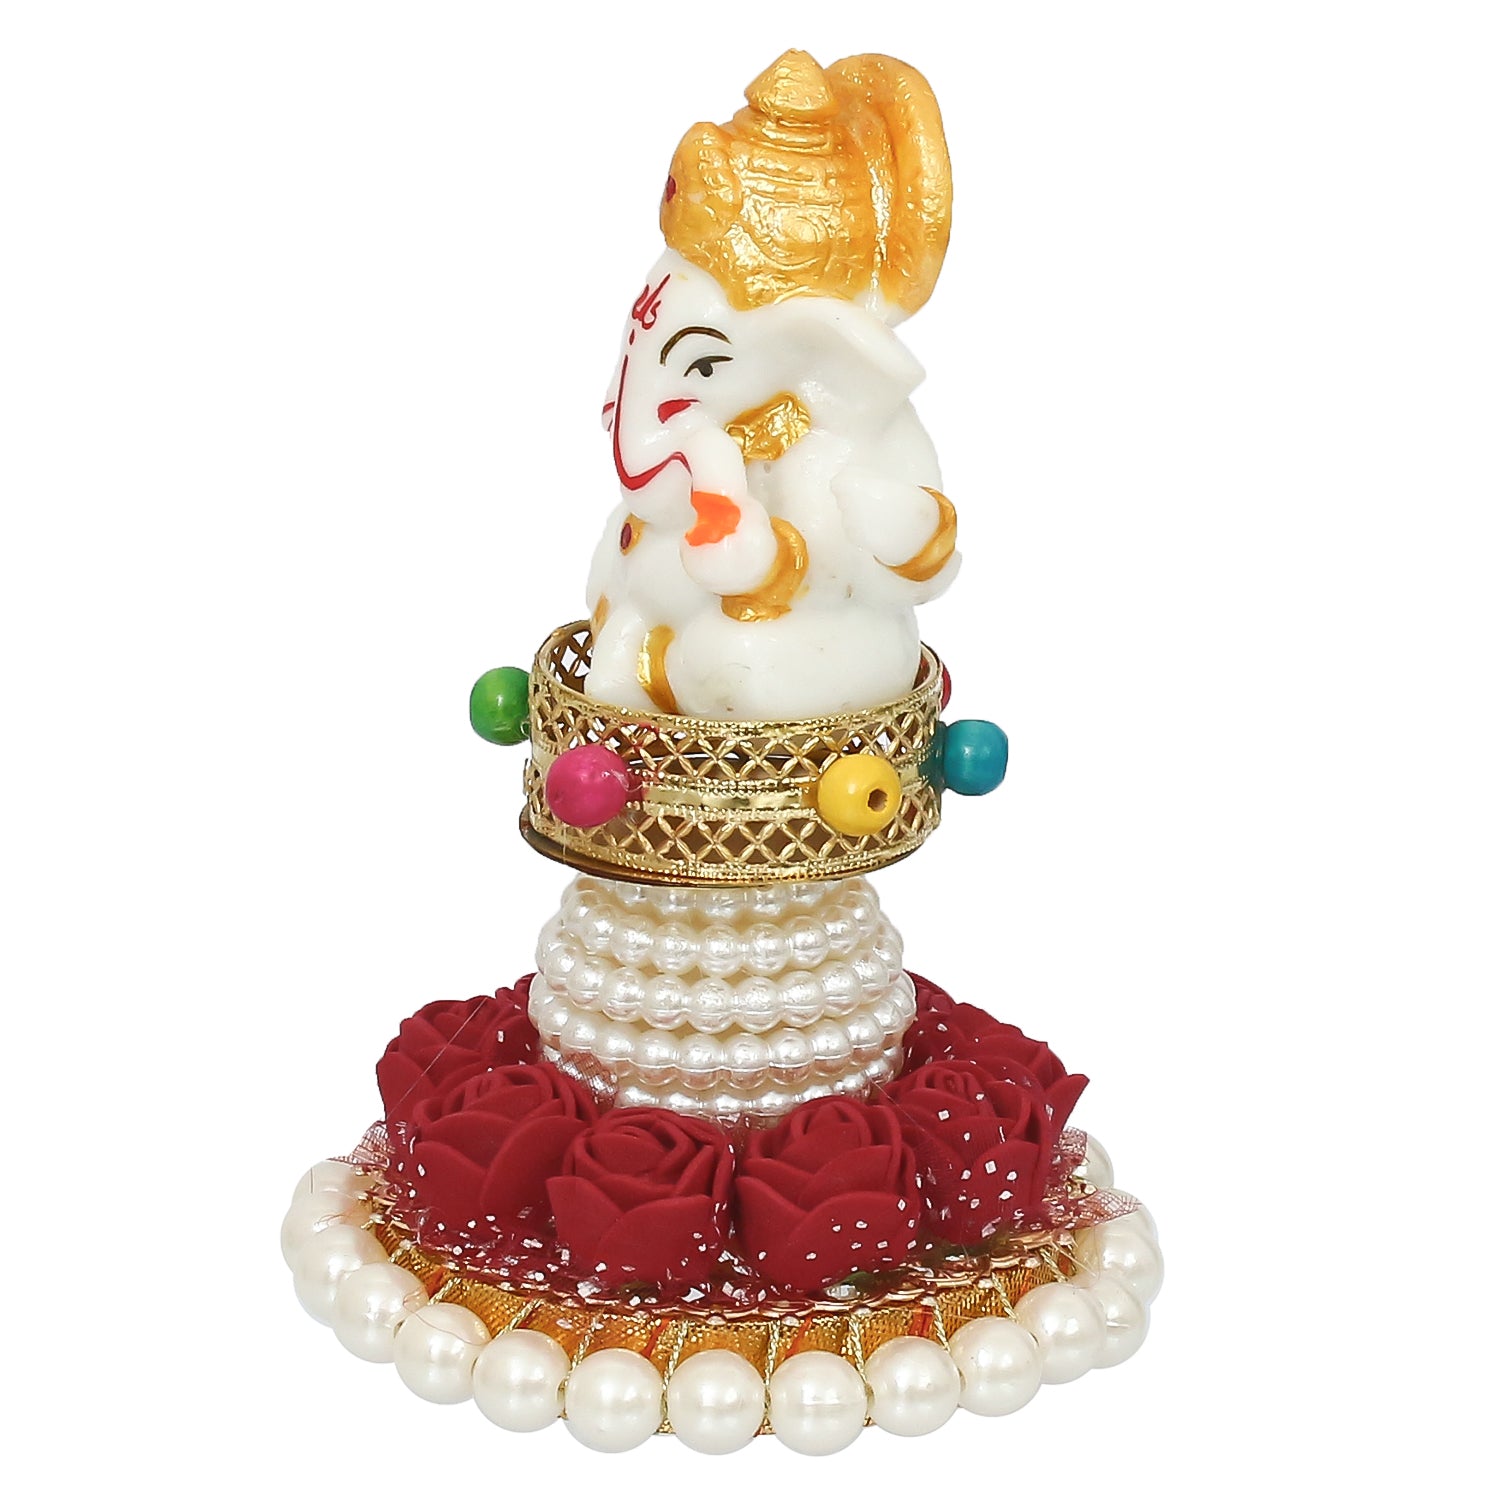 Polyresin Lord Ganesha Idol on Decorative Handcrafted Plate for Home, Office and Car Dashboard 4